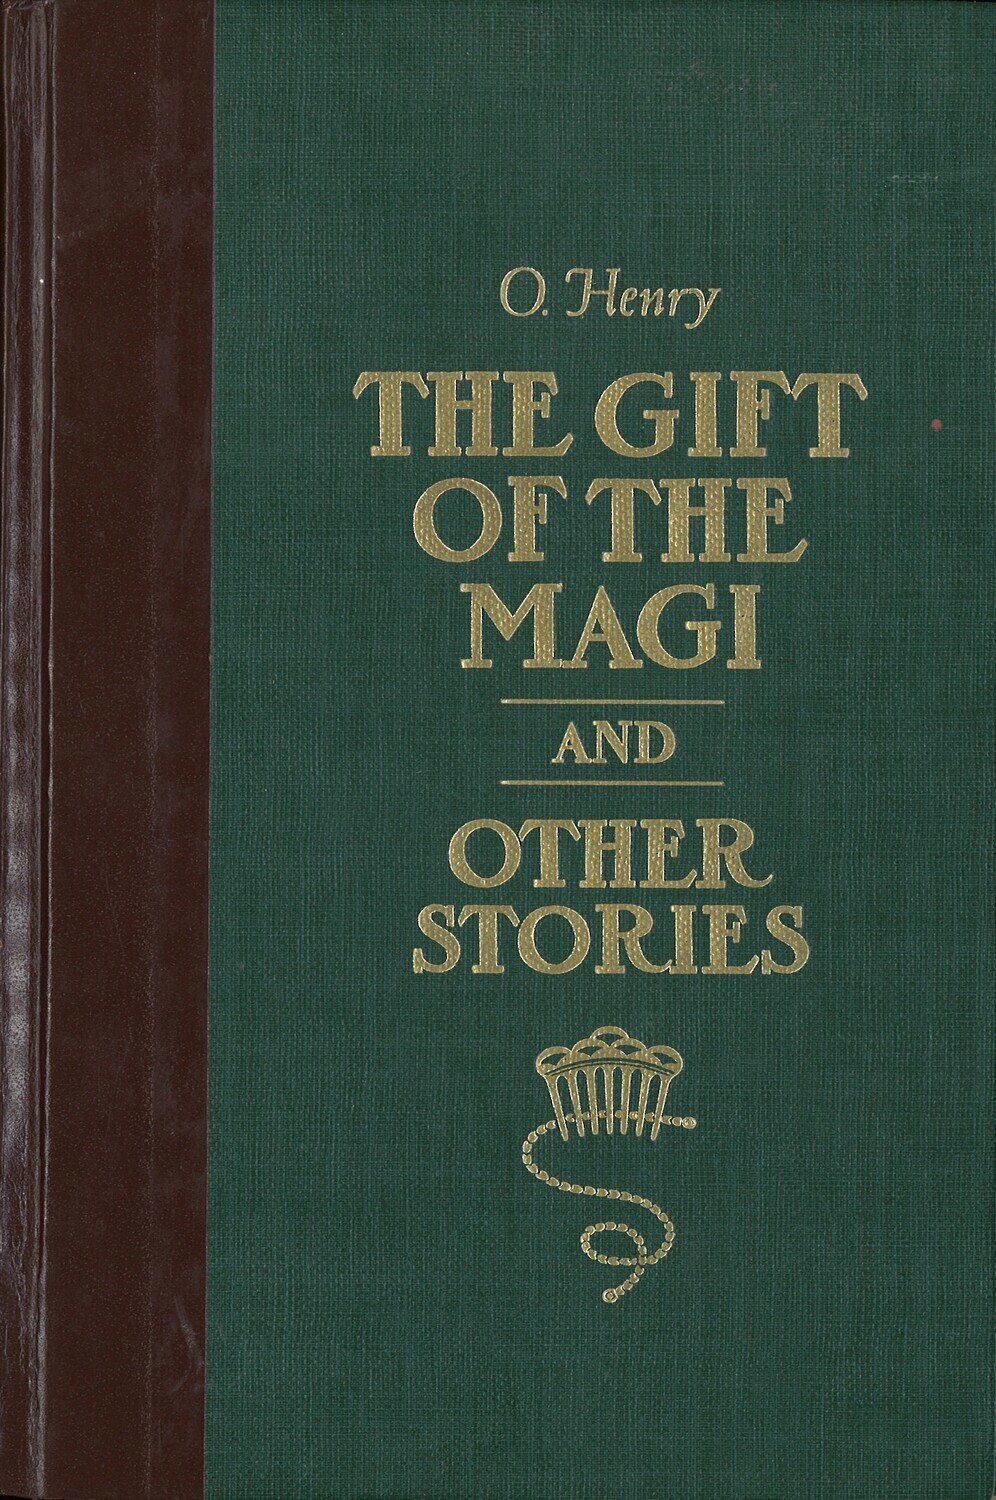 The Gift of The Magi & Other Stories